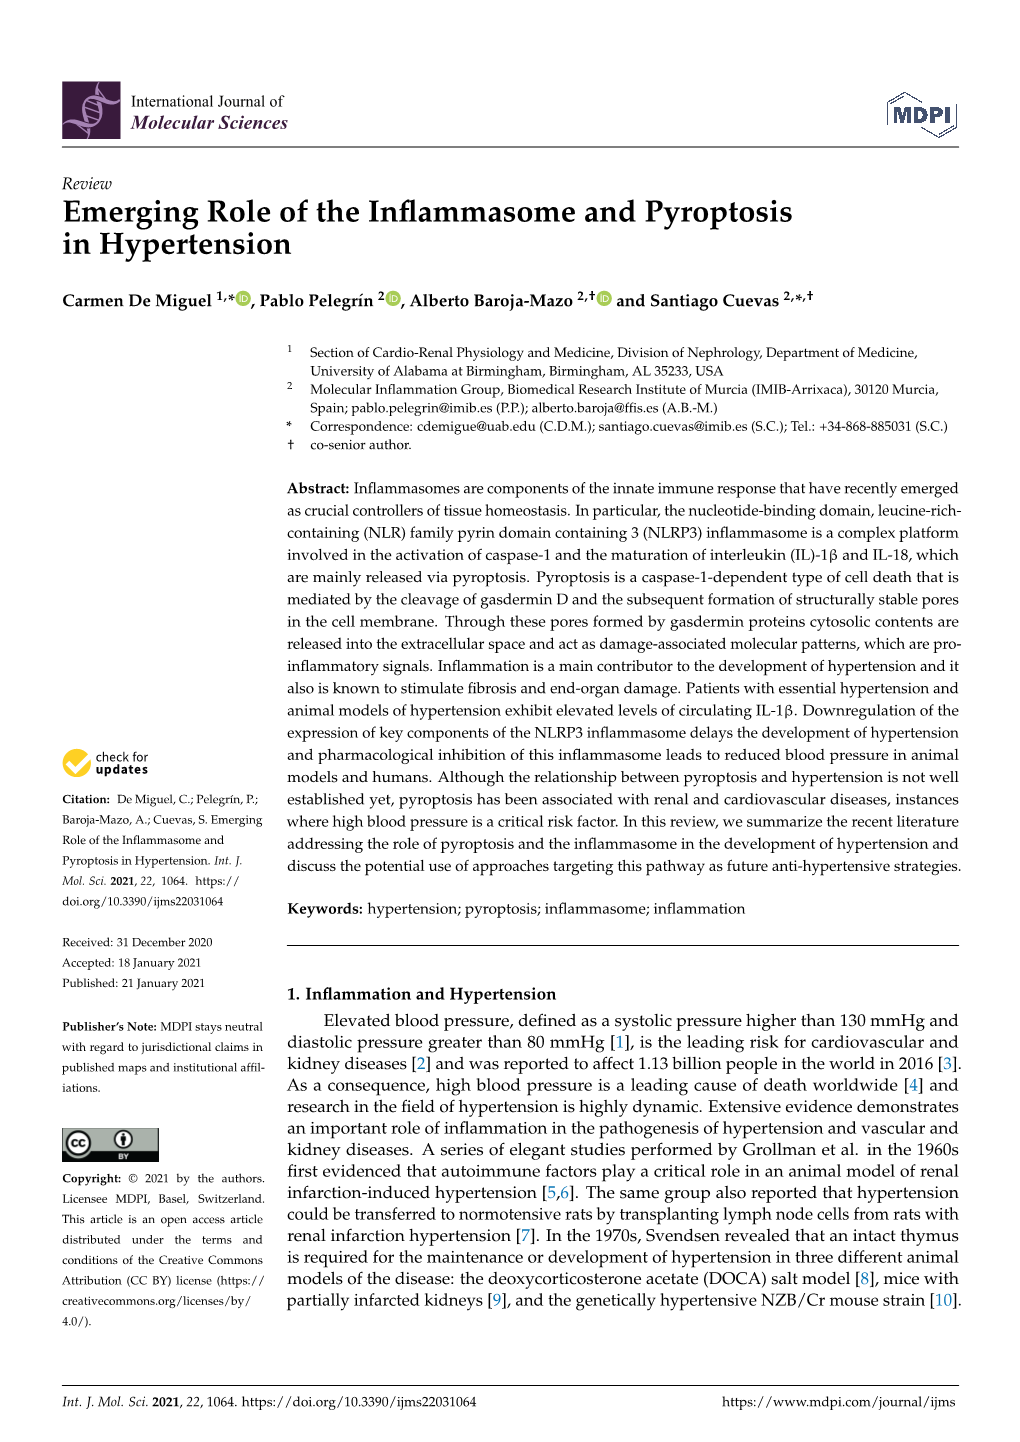 Emerging Role of the Inflammasome and Pyroptosis in Hypertension